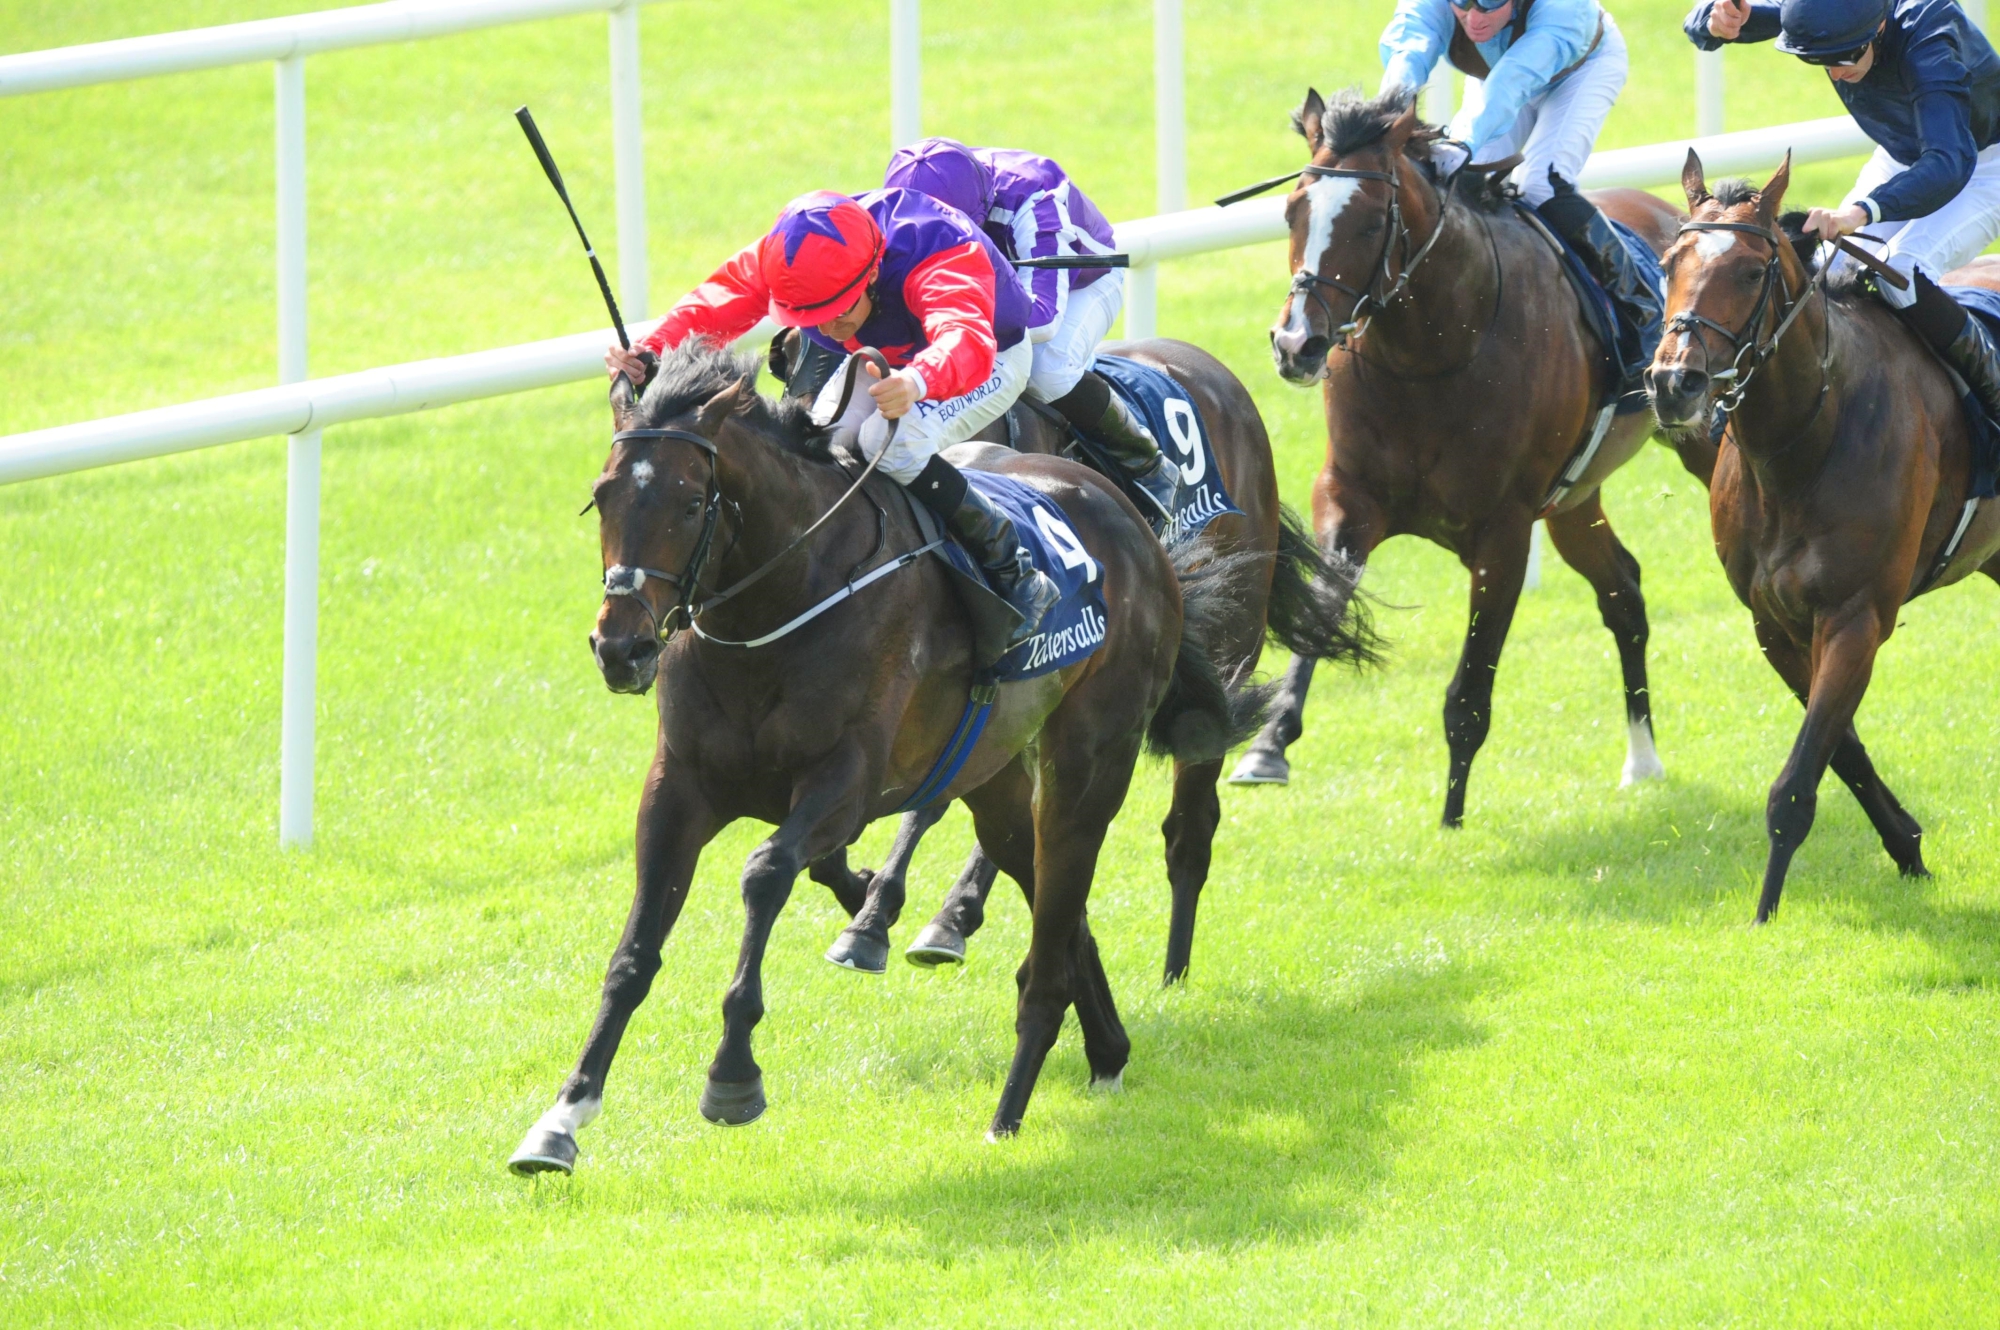 Romanised – IRE : G1 winner in France and Ireland; won Irish 2000 Guineas; also two-time G2 winner in Ireland at The Curragh.